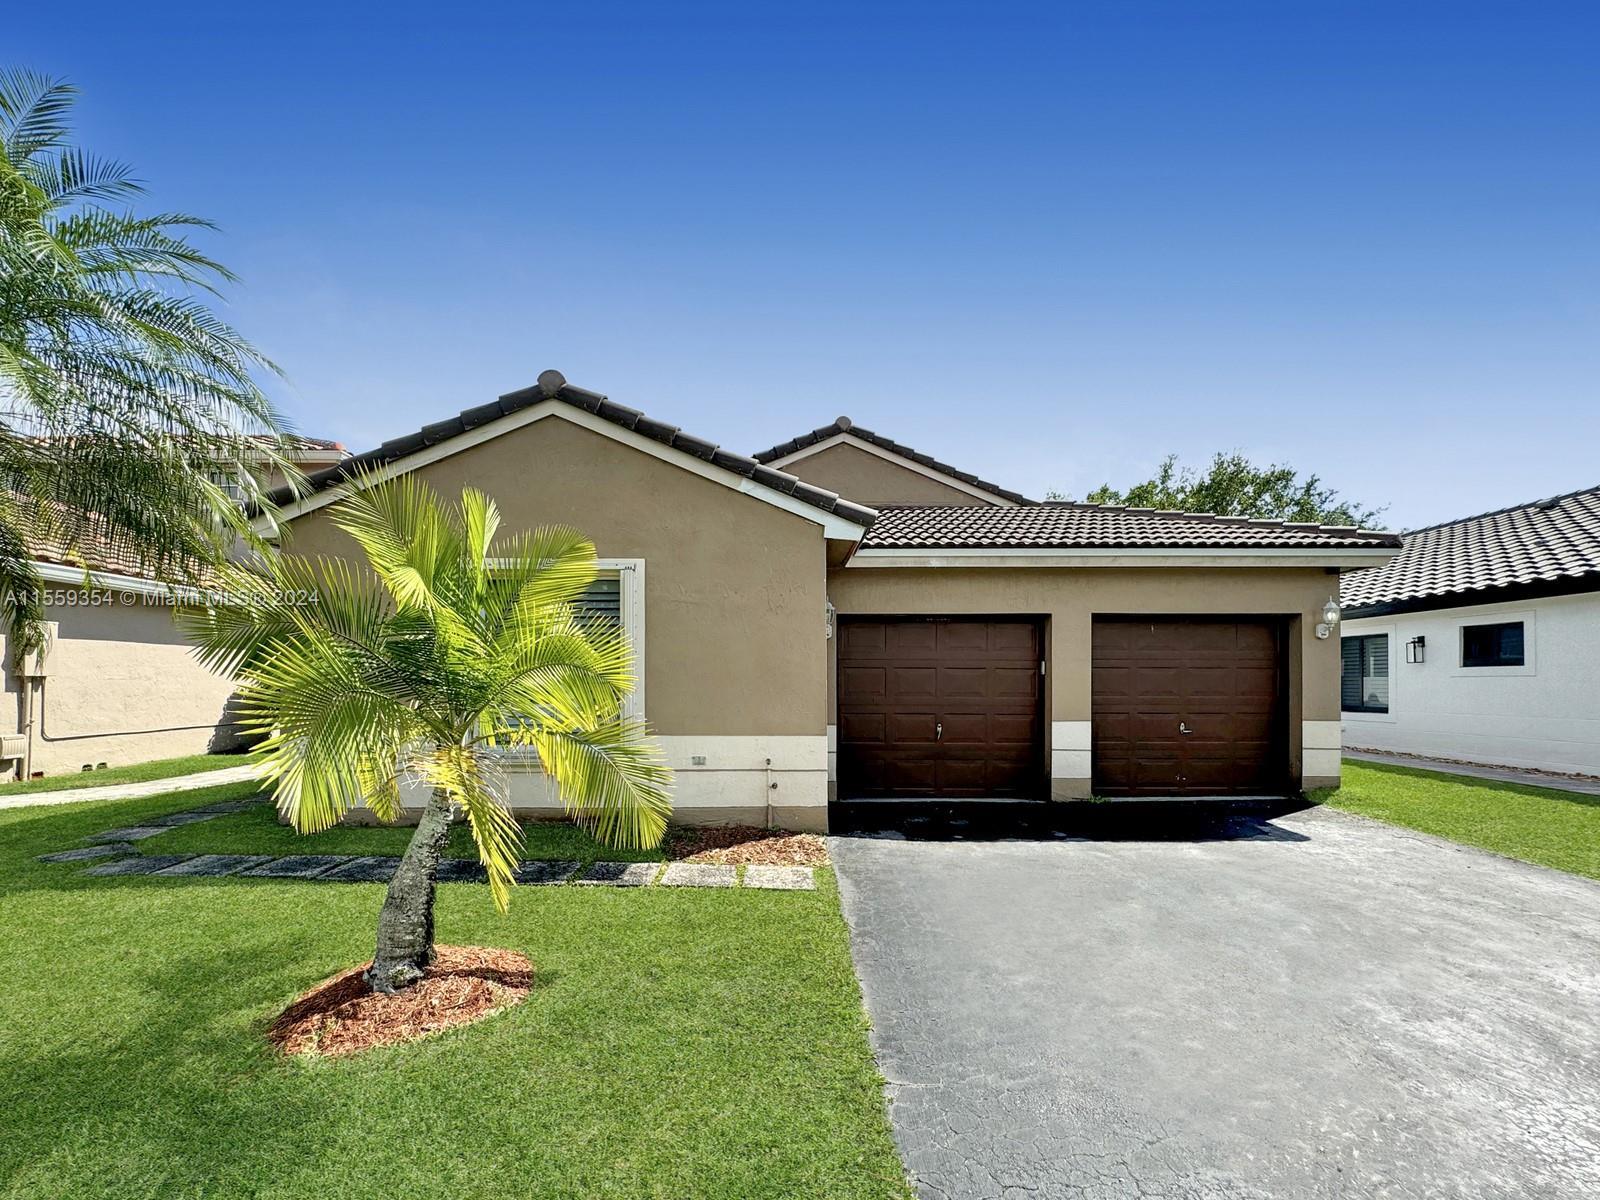 Photo of 19120 NW 19th St in Pembroke Pines, FL